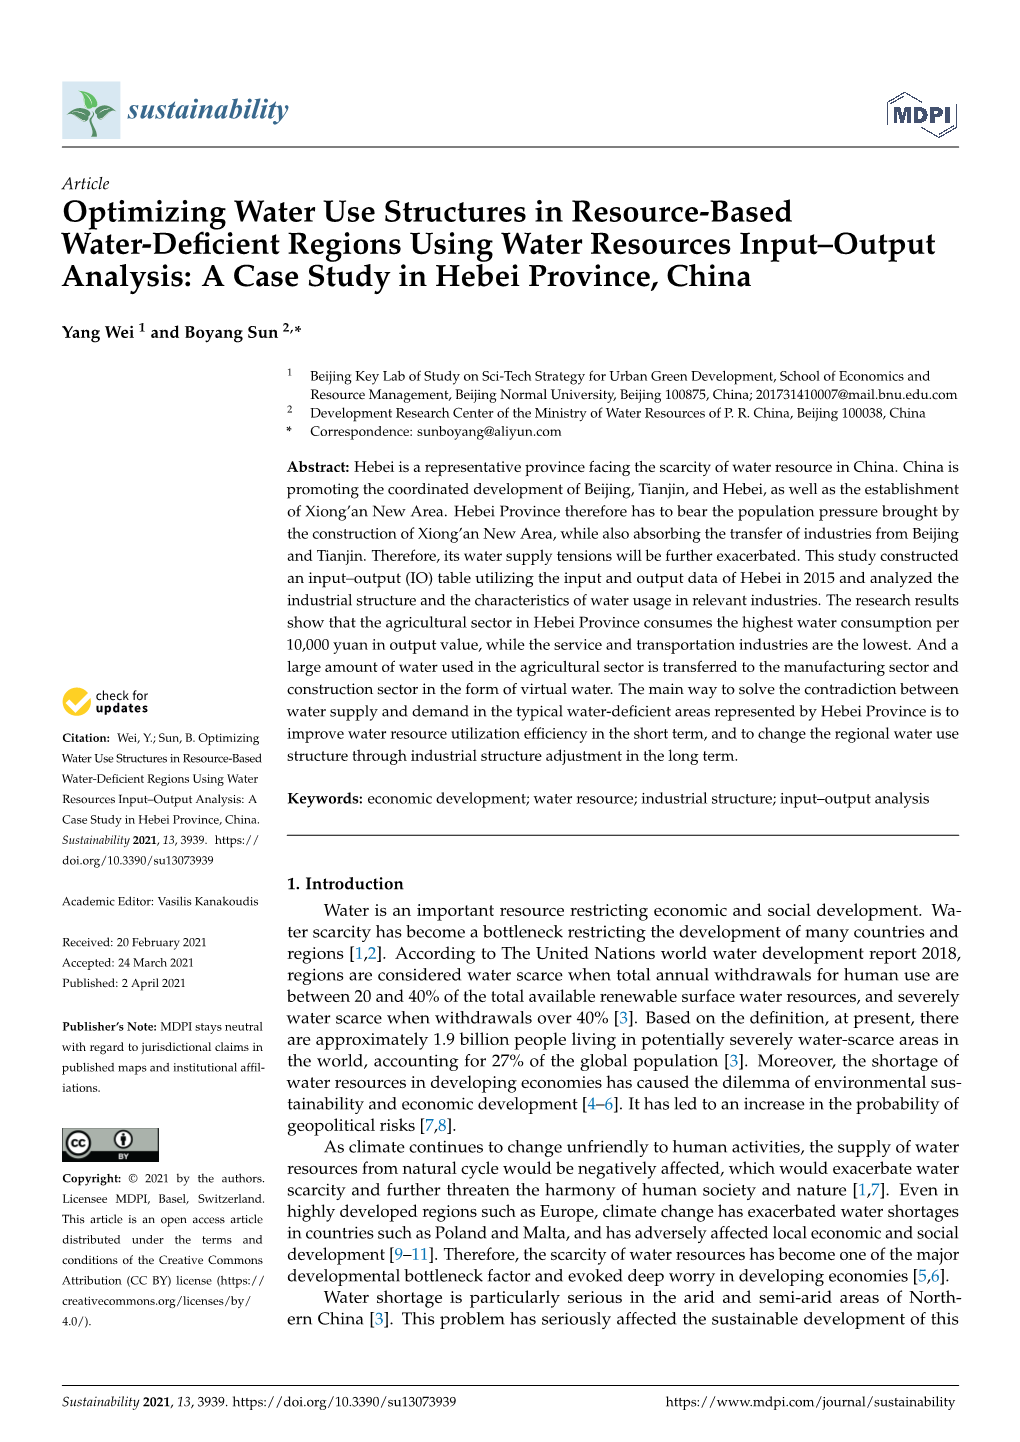 Optimizing Water Use Structures in Resource-Based Water-Deficient